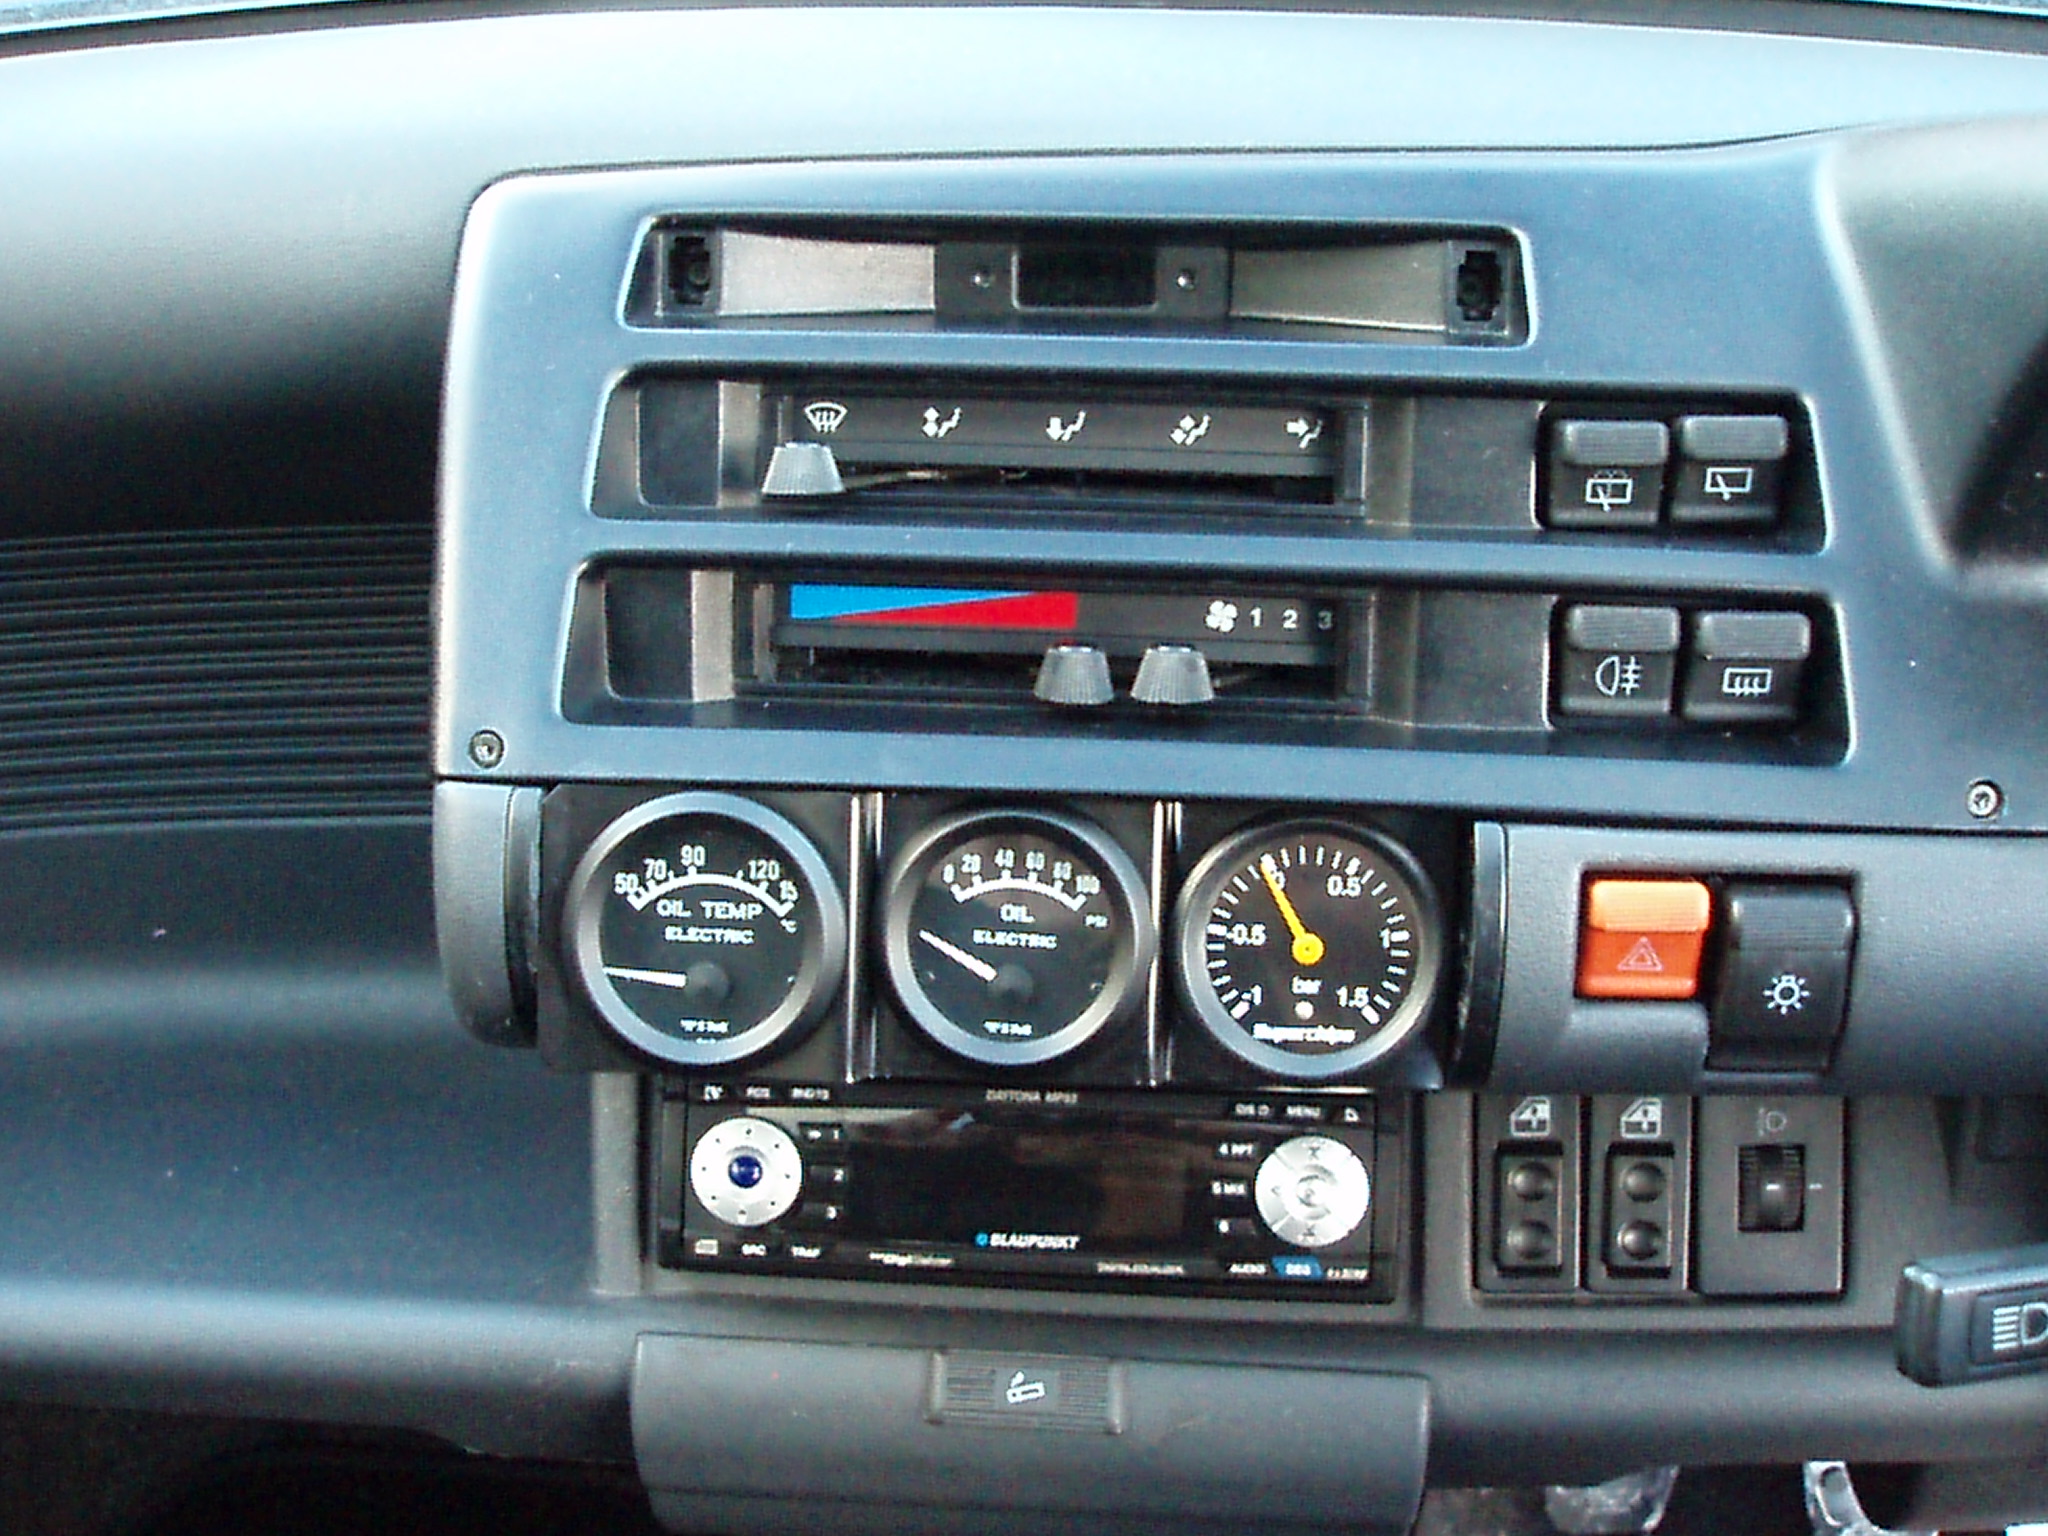 Dials fitted where the central vents used to be in Cinq